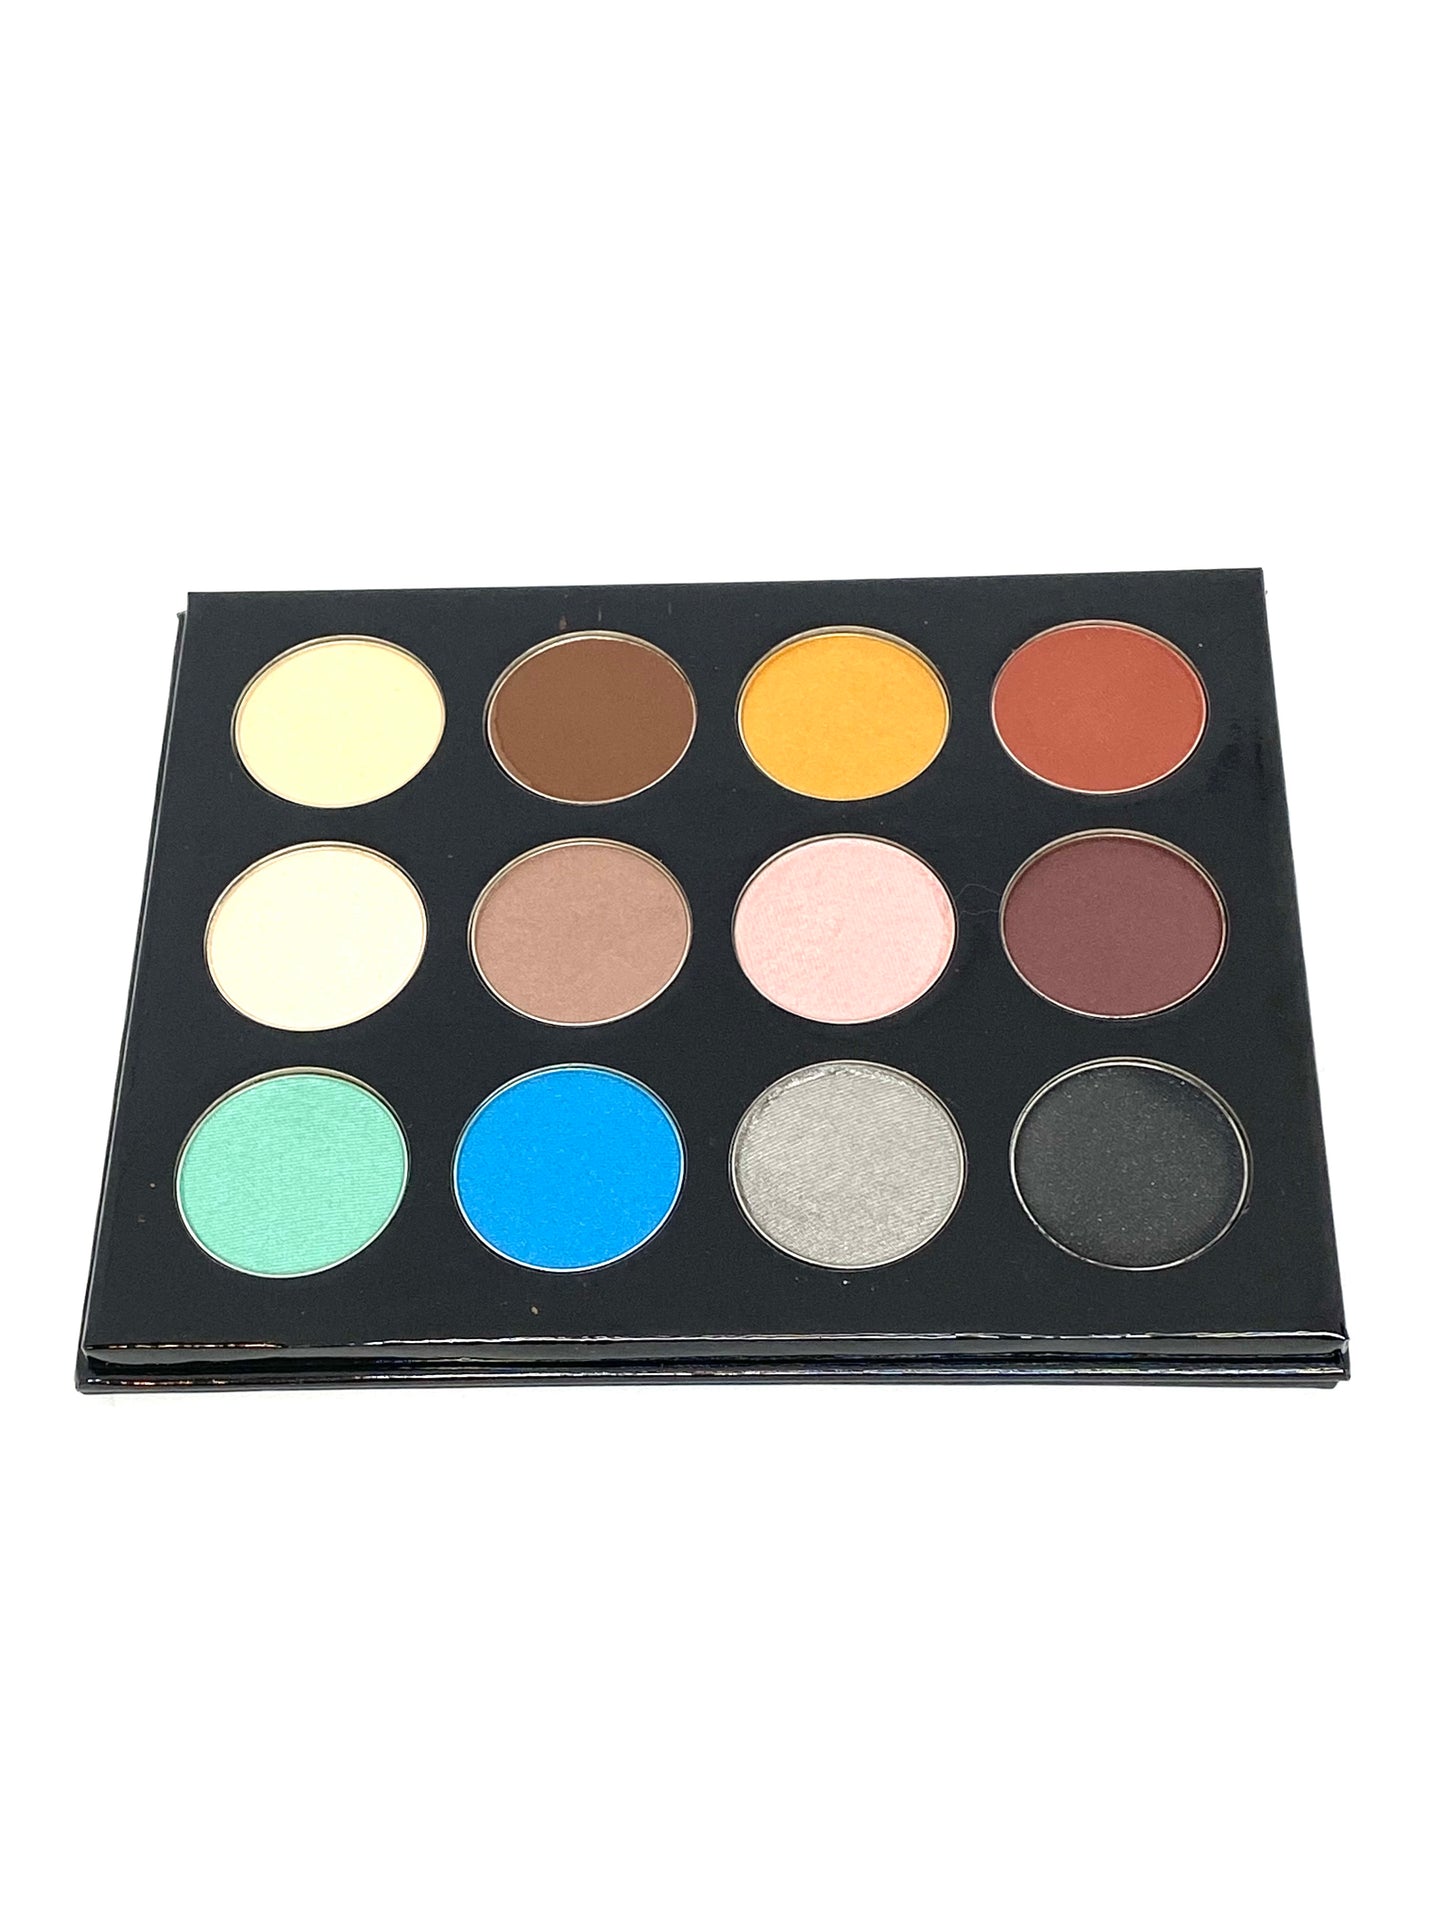 Check Out my Eyes  Eyeshadow Palette